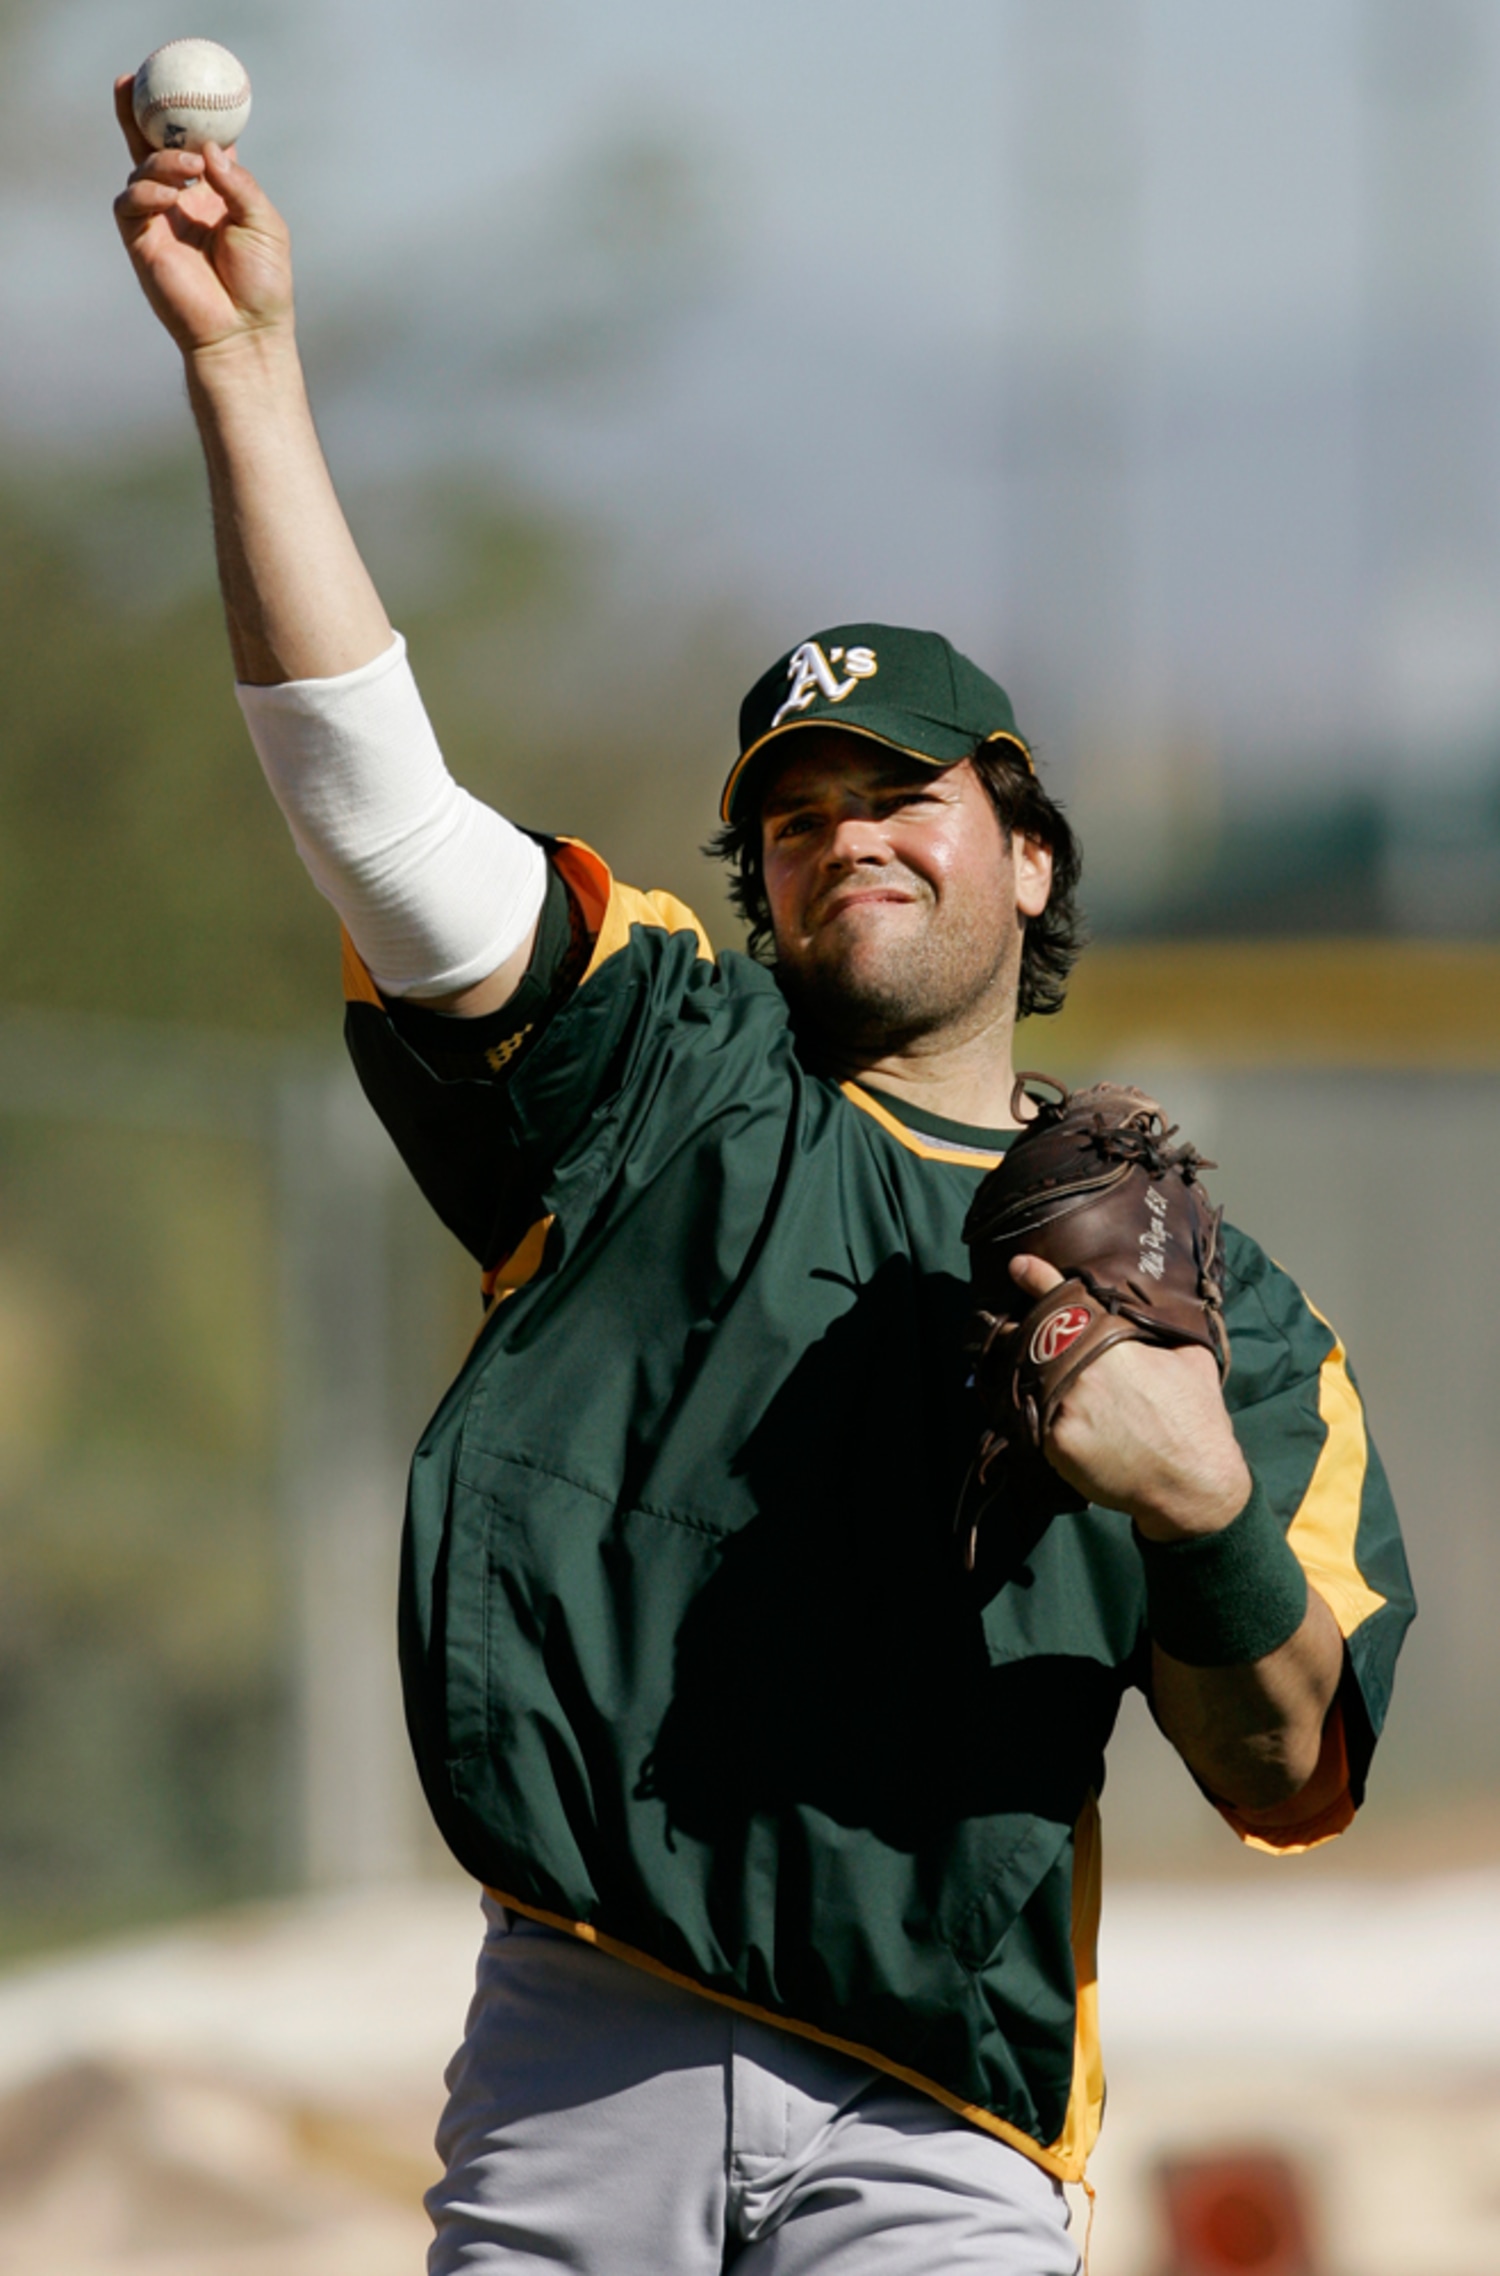 World Baseball Classic series Italian team catcher Mike Piazza winds up for  a throw during a team workout, in Lakeland, Fla., Friday, March 3, 2006.  The series involving teams from around the